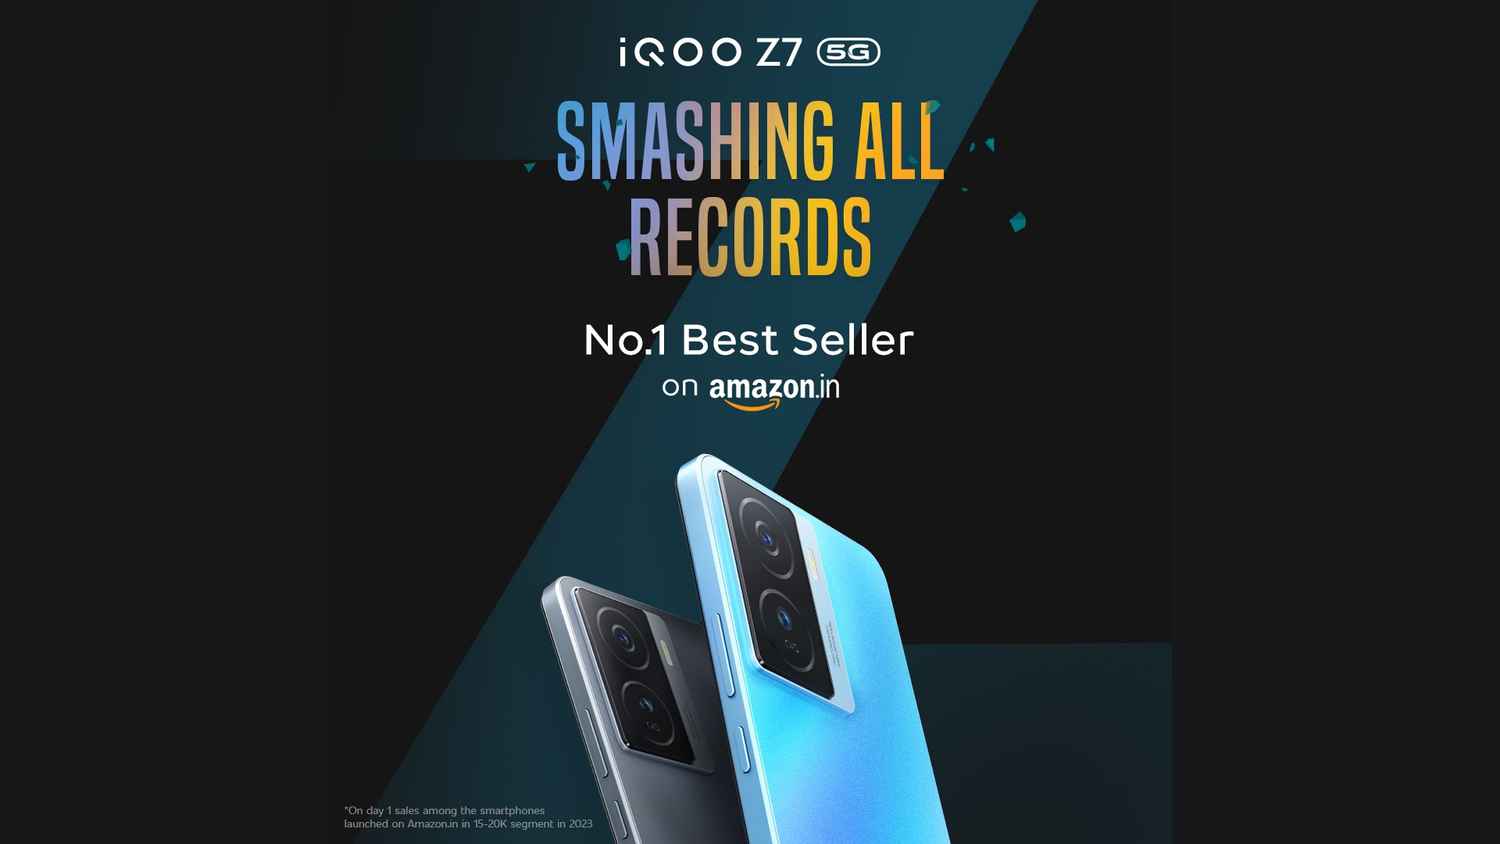 iQOO Z7 becomes the highest selling smartphone in the segment on Amazon.in